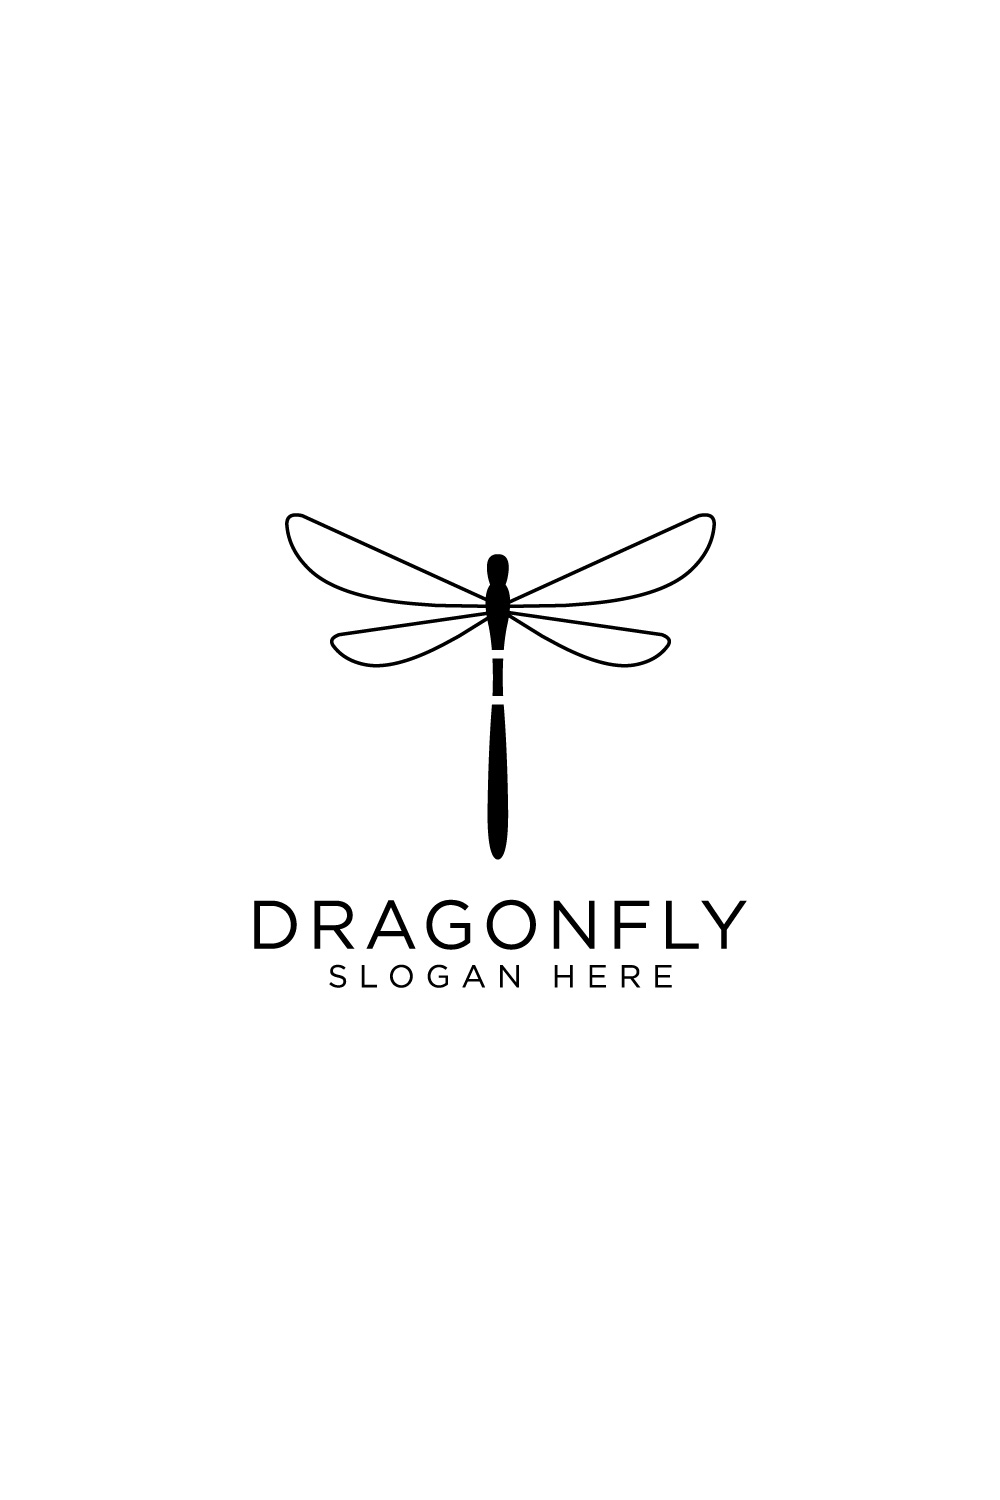 dragonfly animal logo pinterest preview image.